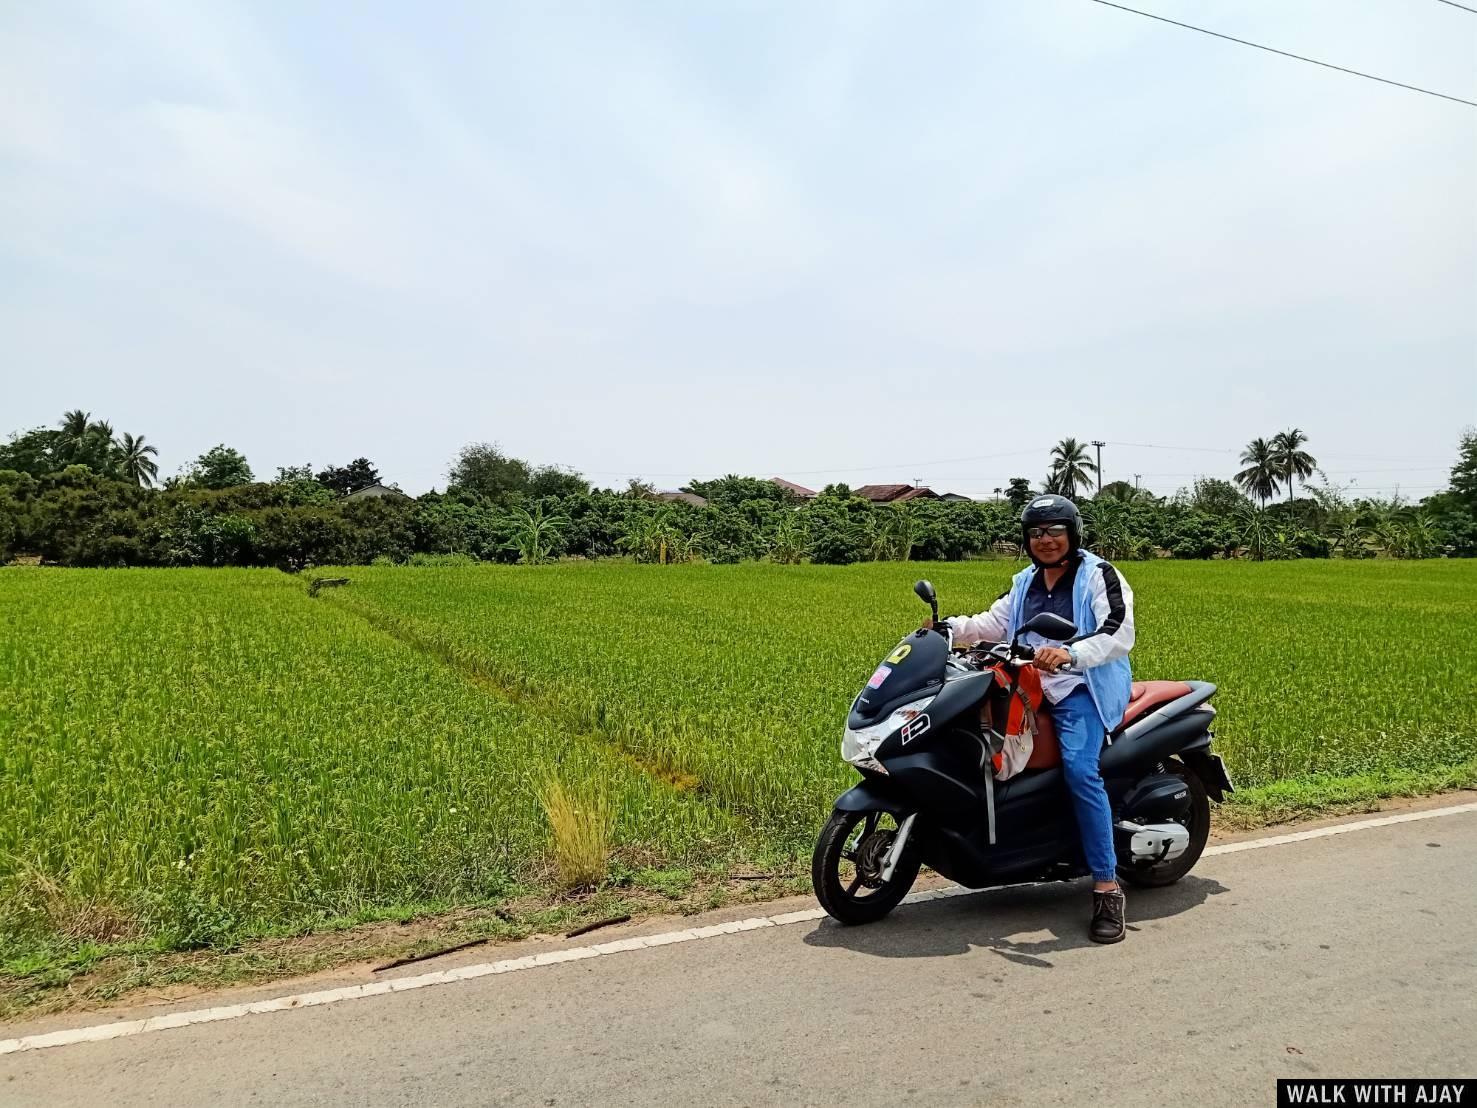 Driving Motorbike From Mae Klang Luang to Chiangmai : Thailand (Apr’21) – Day 6 2